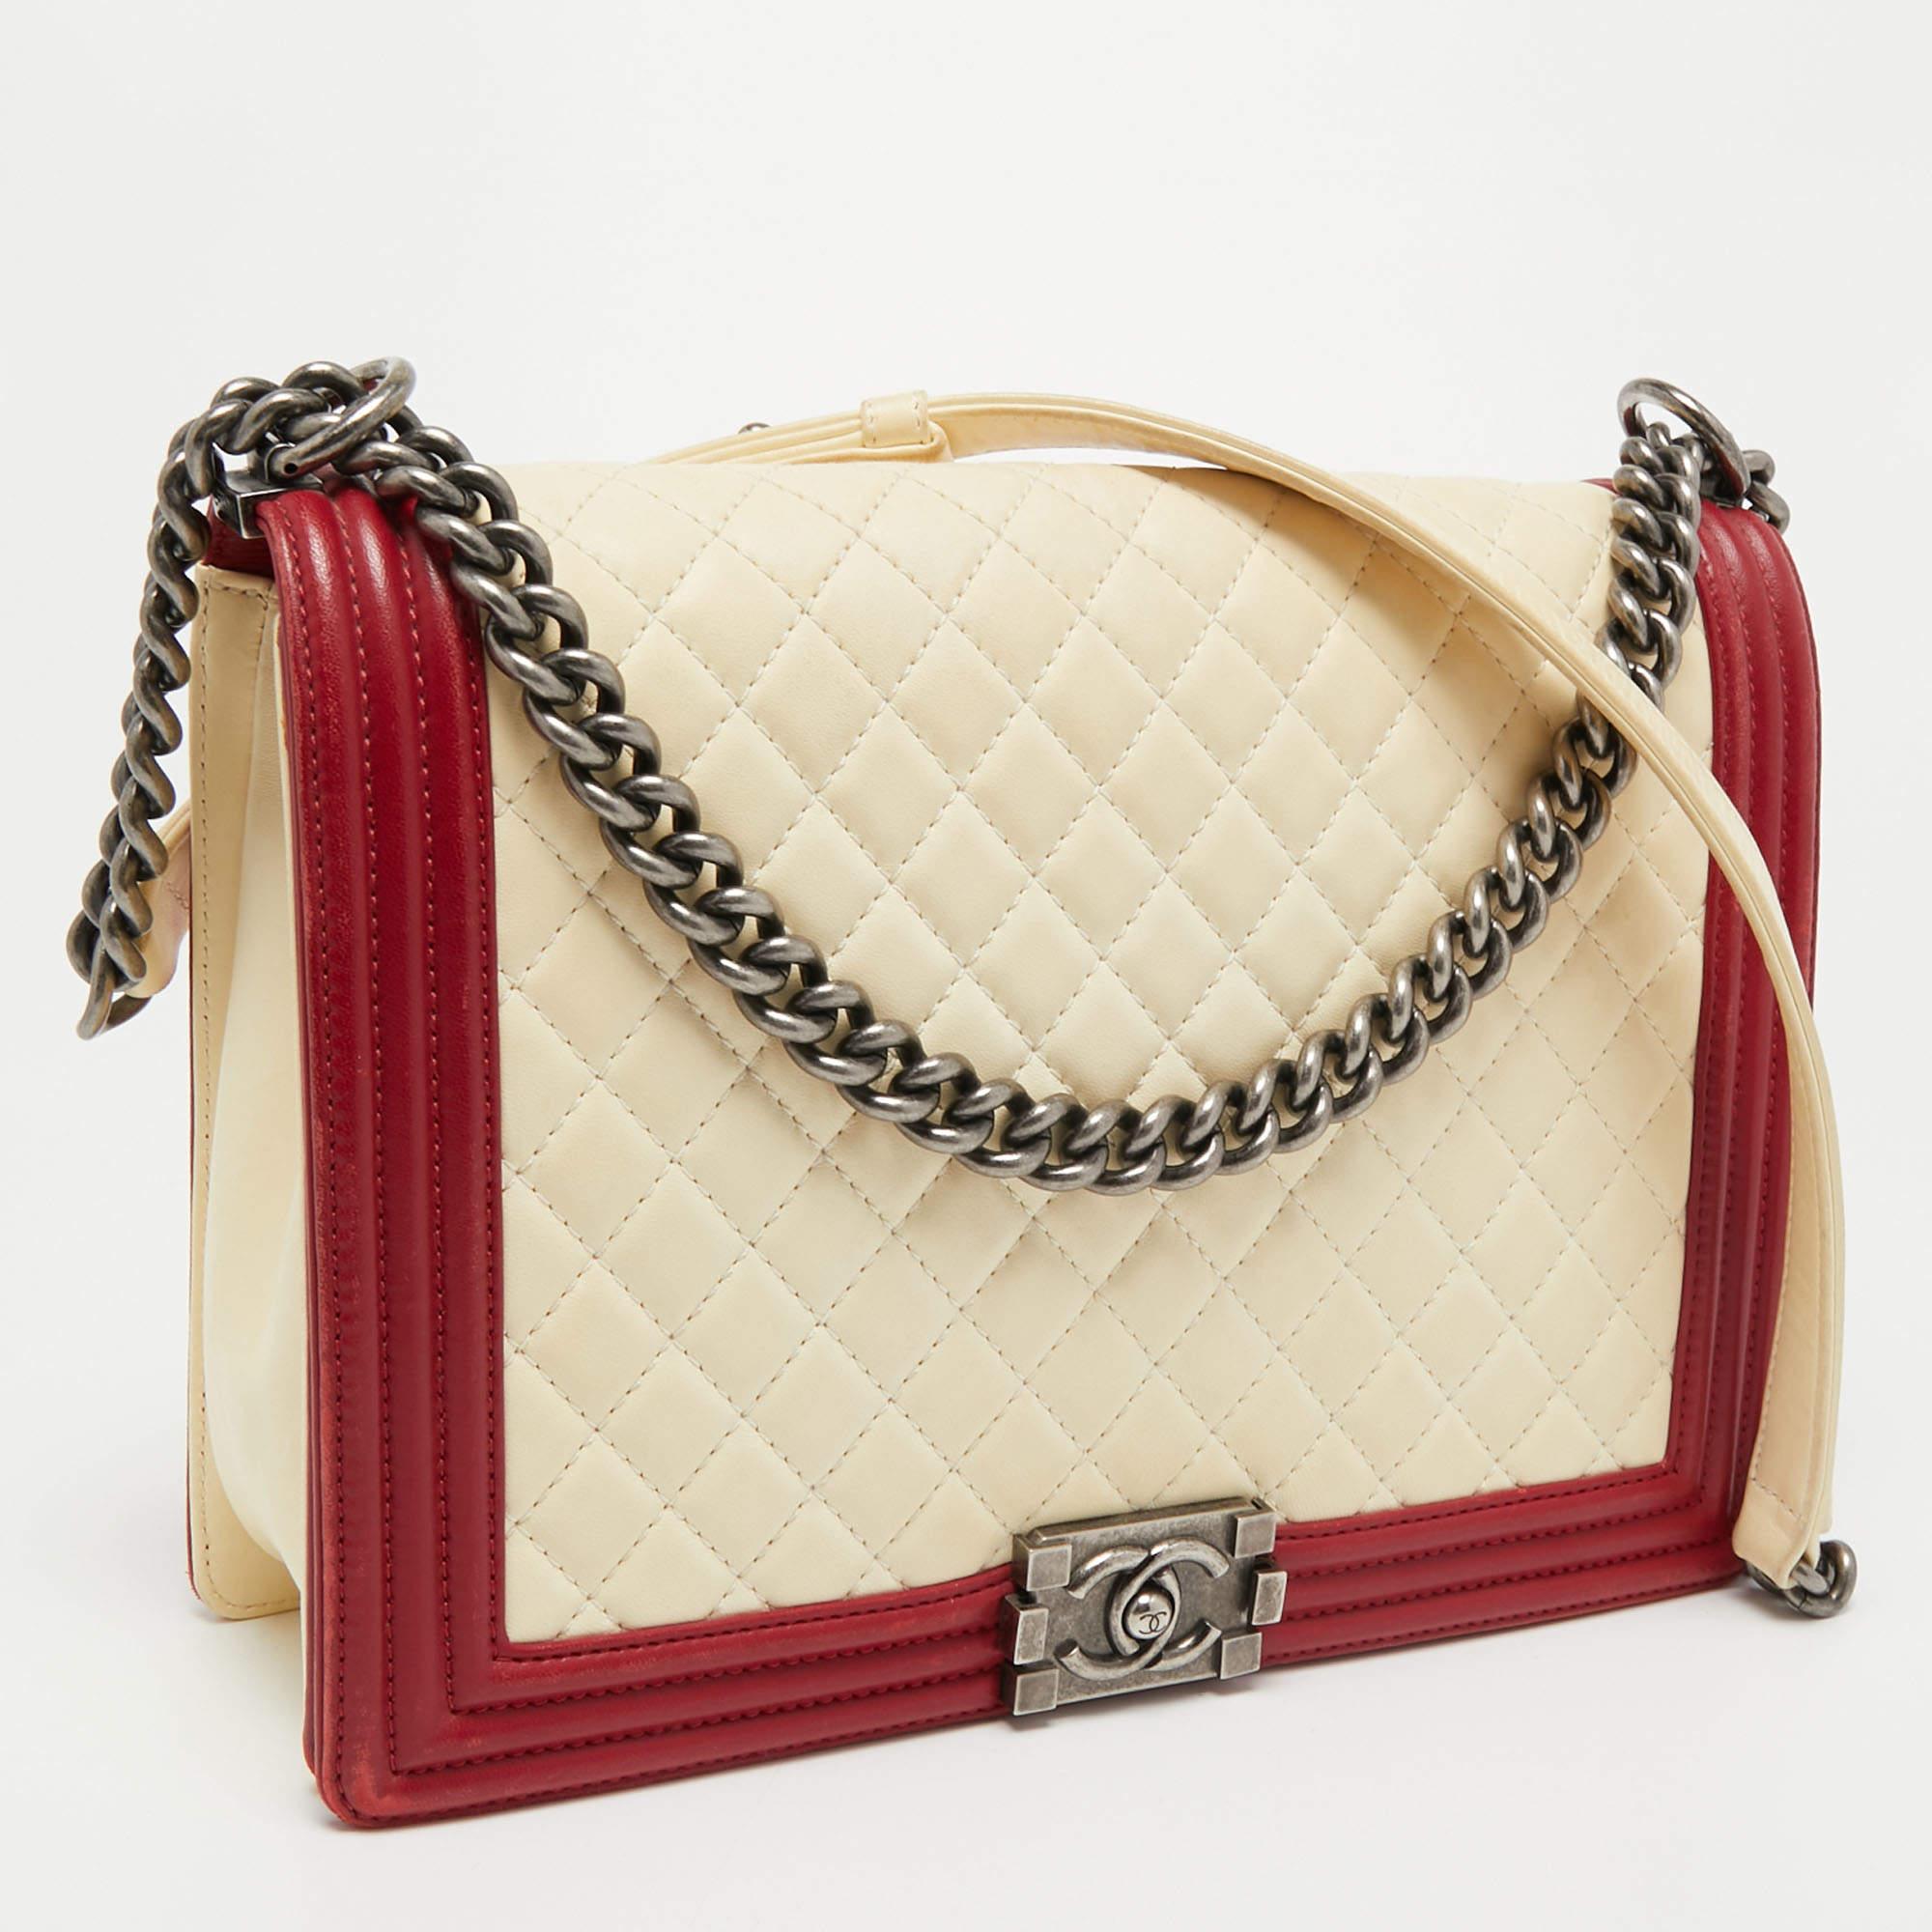 Chanel Cream/Red Quilted Leather Large Boy Flap Bag 11